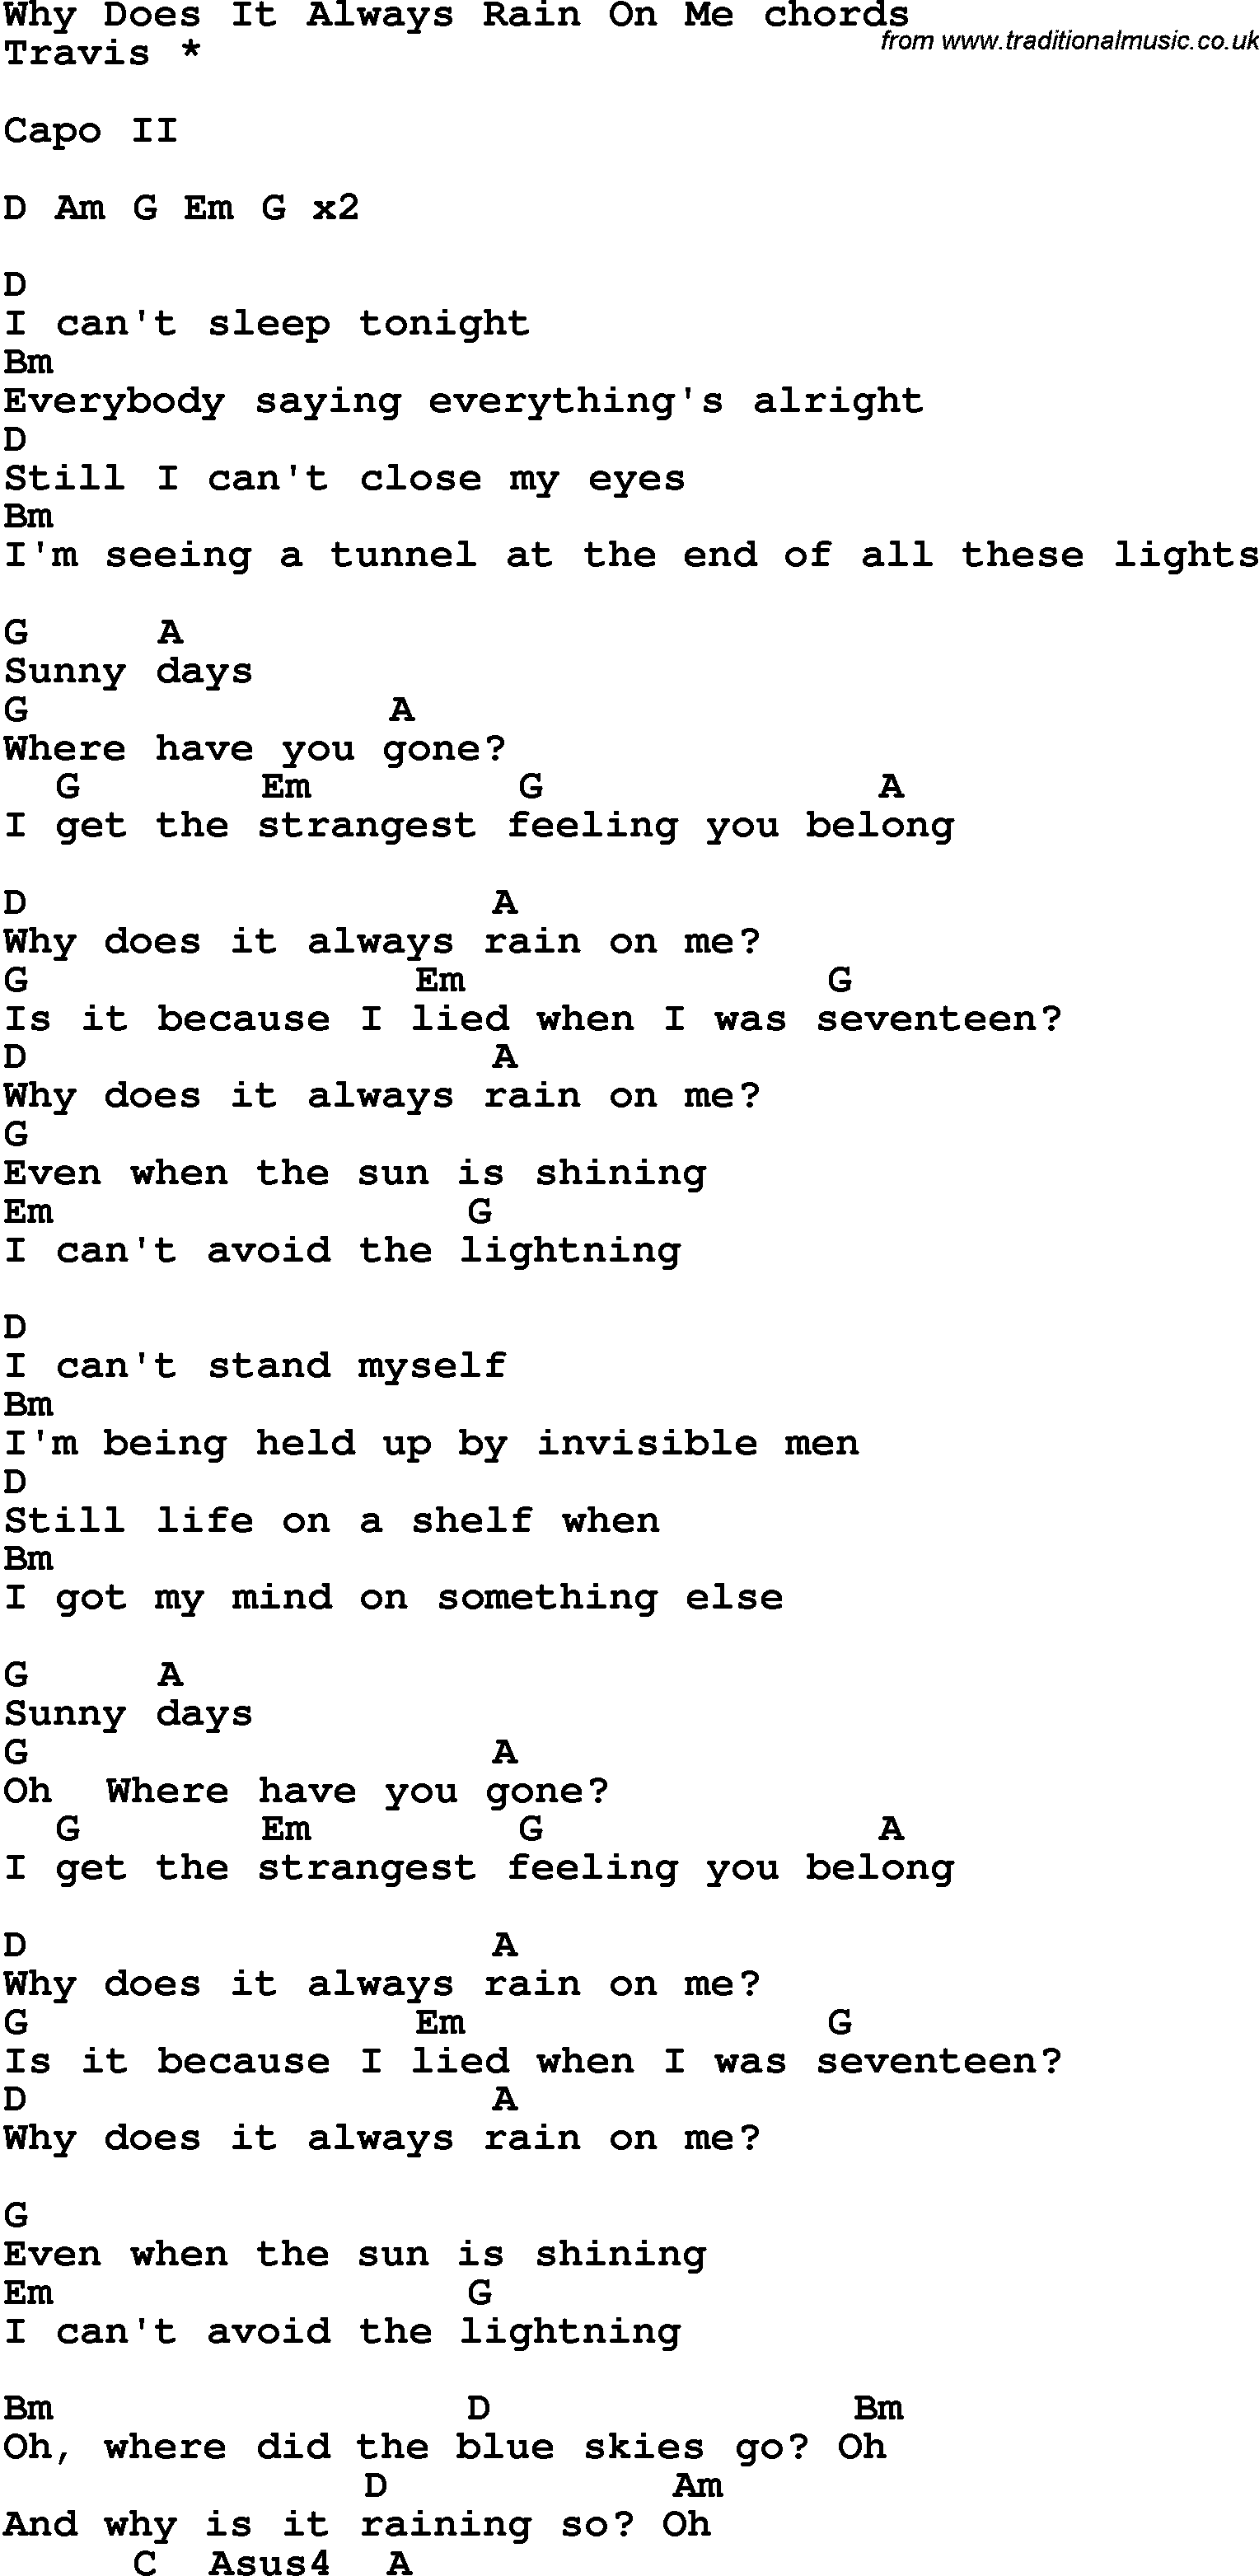 Song lyrics with guitar chords for Why Does It Always Rain On Me